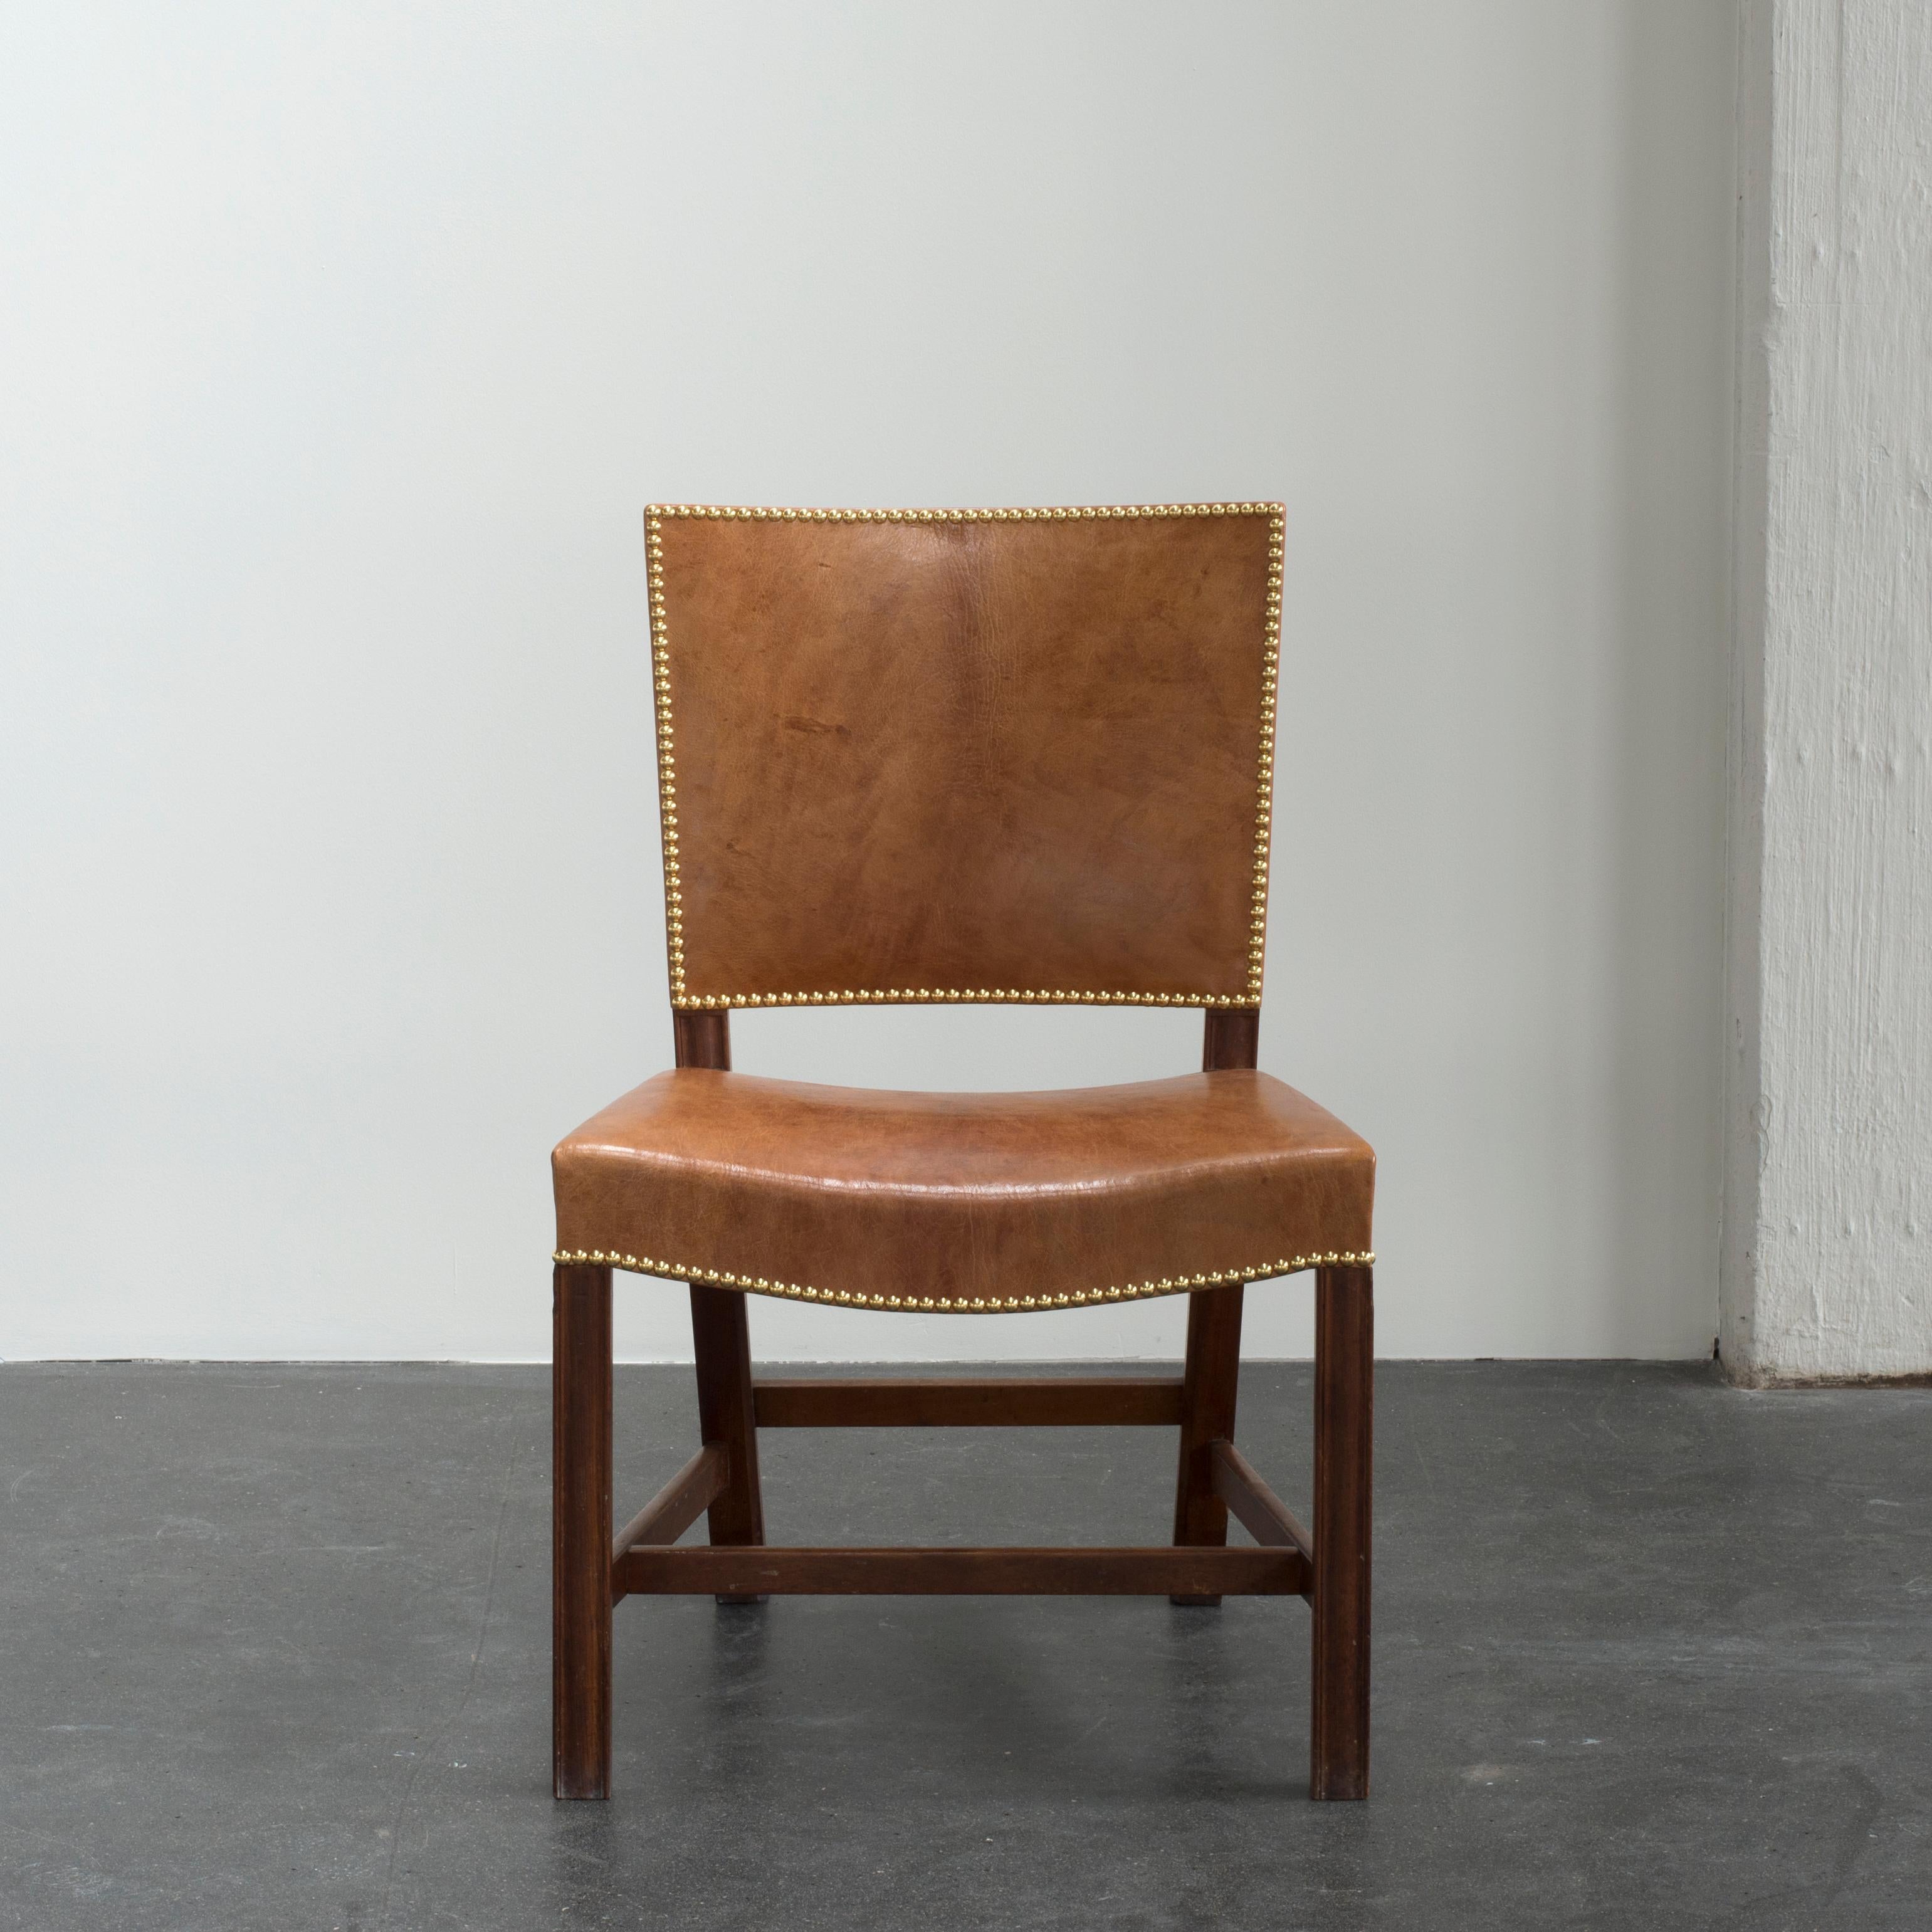 Kaare Klint 'Red Chair' in Cuban mahogany, Niger leather and brass nails. Executed by Rud. Rasmussen.

Underside with manufacturer's paper label RUD. RASMUSSENS/SNEDKERIER/45 NØRREBROGAD/KØBENHAVN and architect's monogrammed paper label.